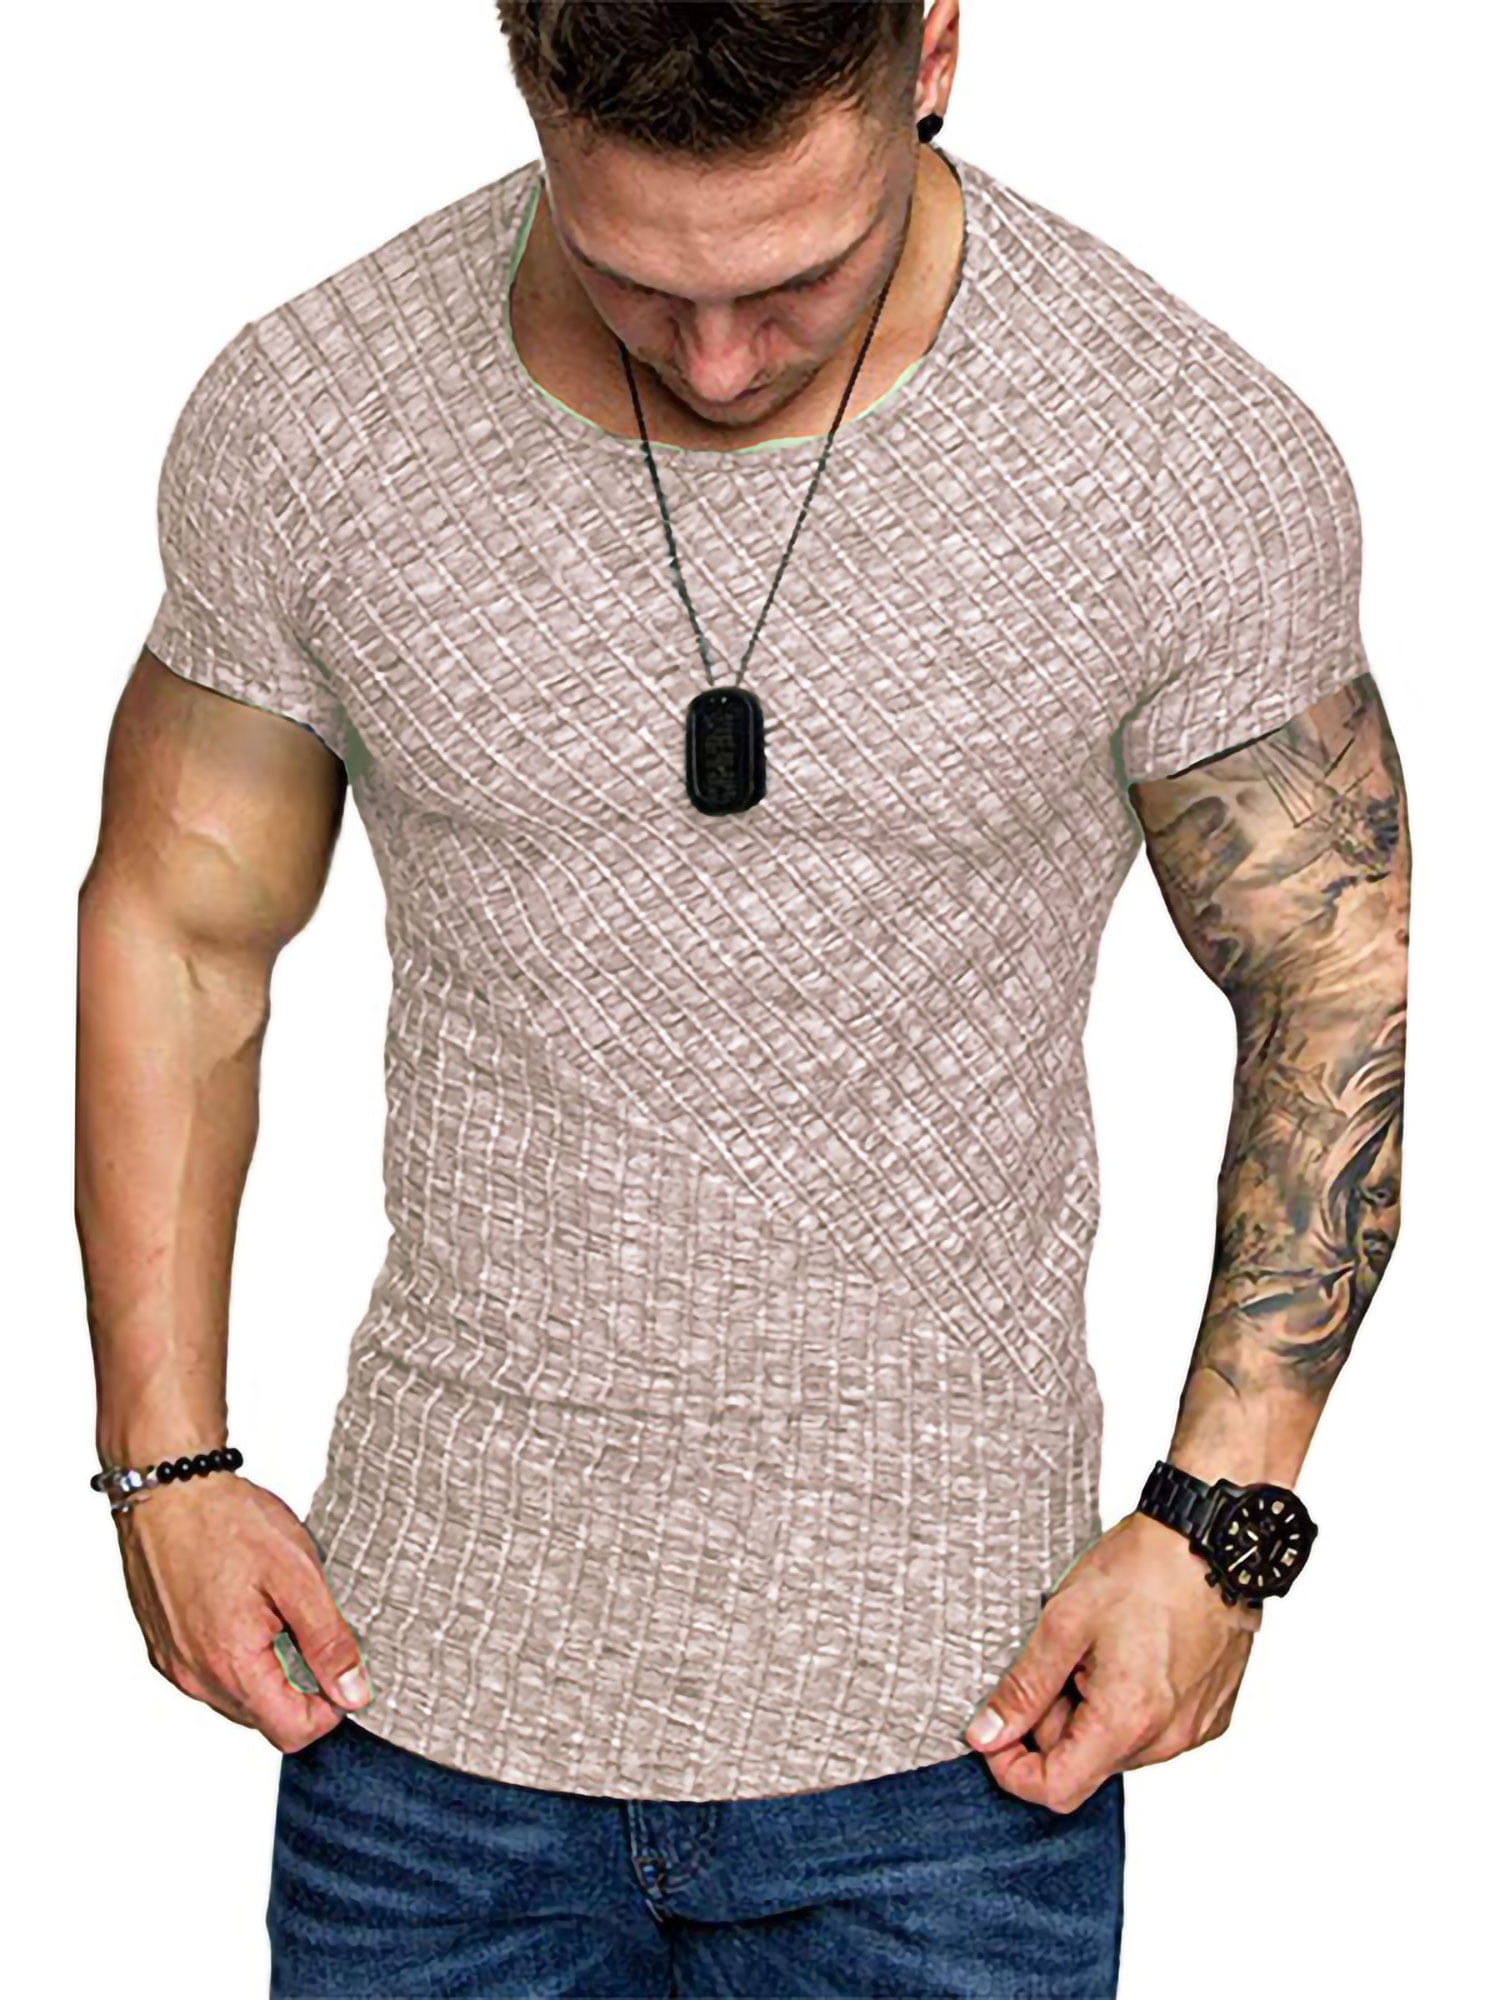 Mens Compression Baselayer Athletic Workout T Shirts Short Sleeve Slim Fit Tee 